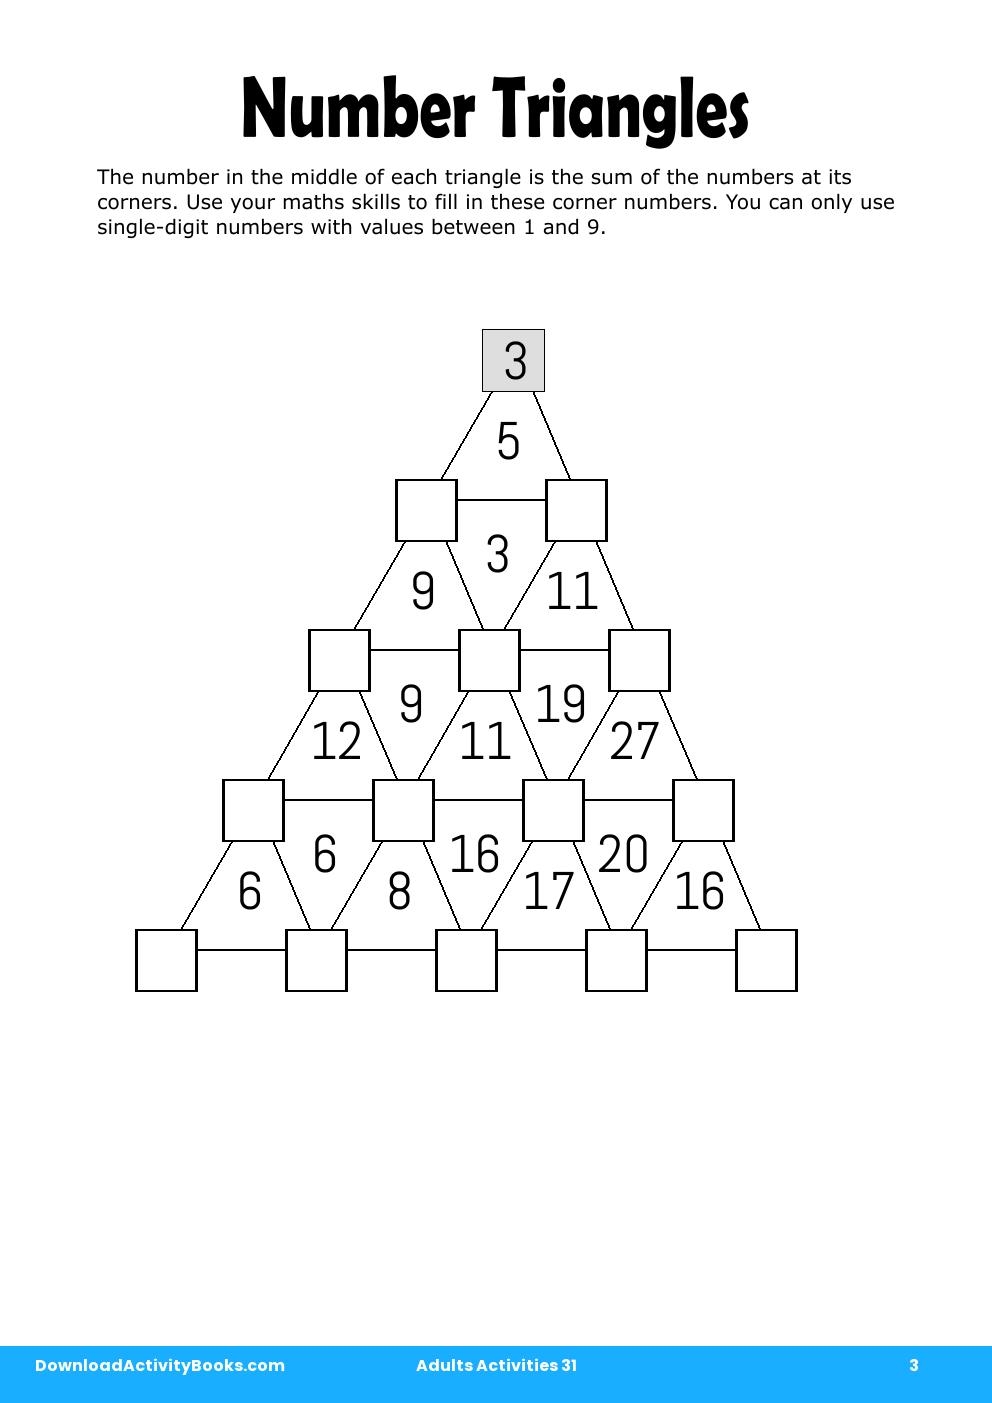 Number Triangles in Adults Activities 31